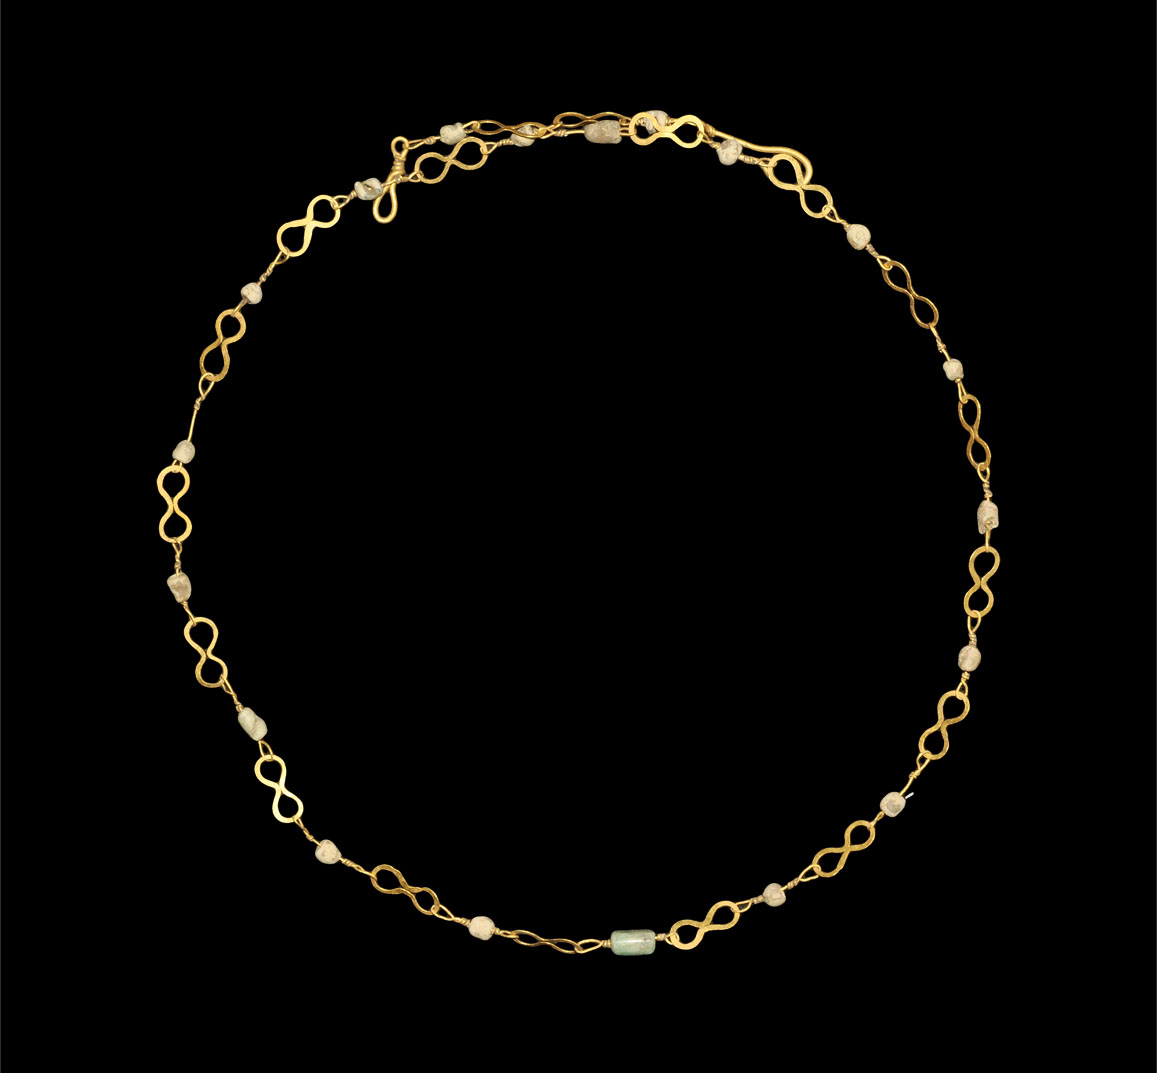 Roman Gold with Emerald Bead Necklace